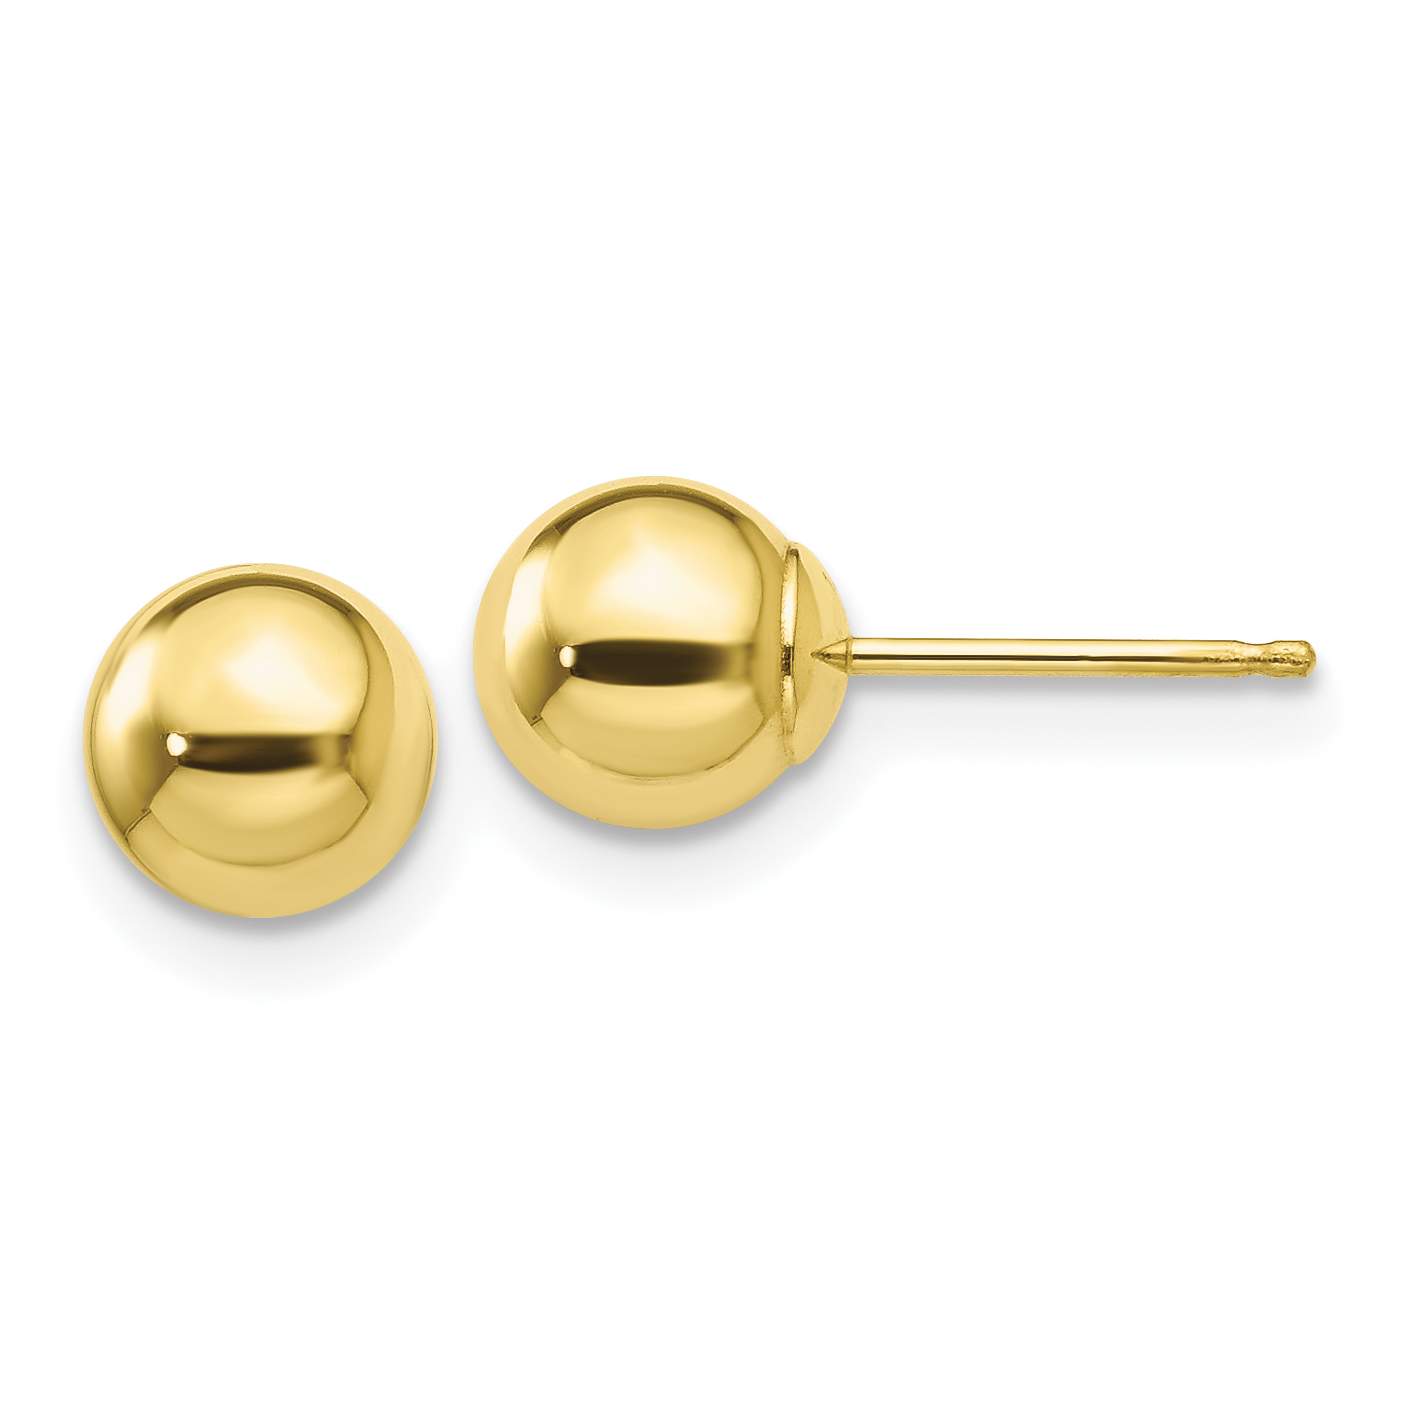 5 Pair (10 Pieces) Ball Post Earrings - Gold 6mm